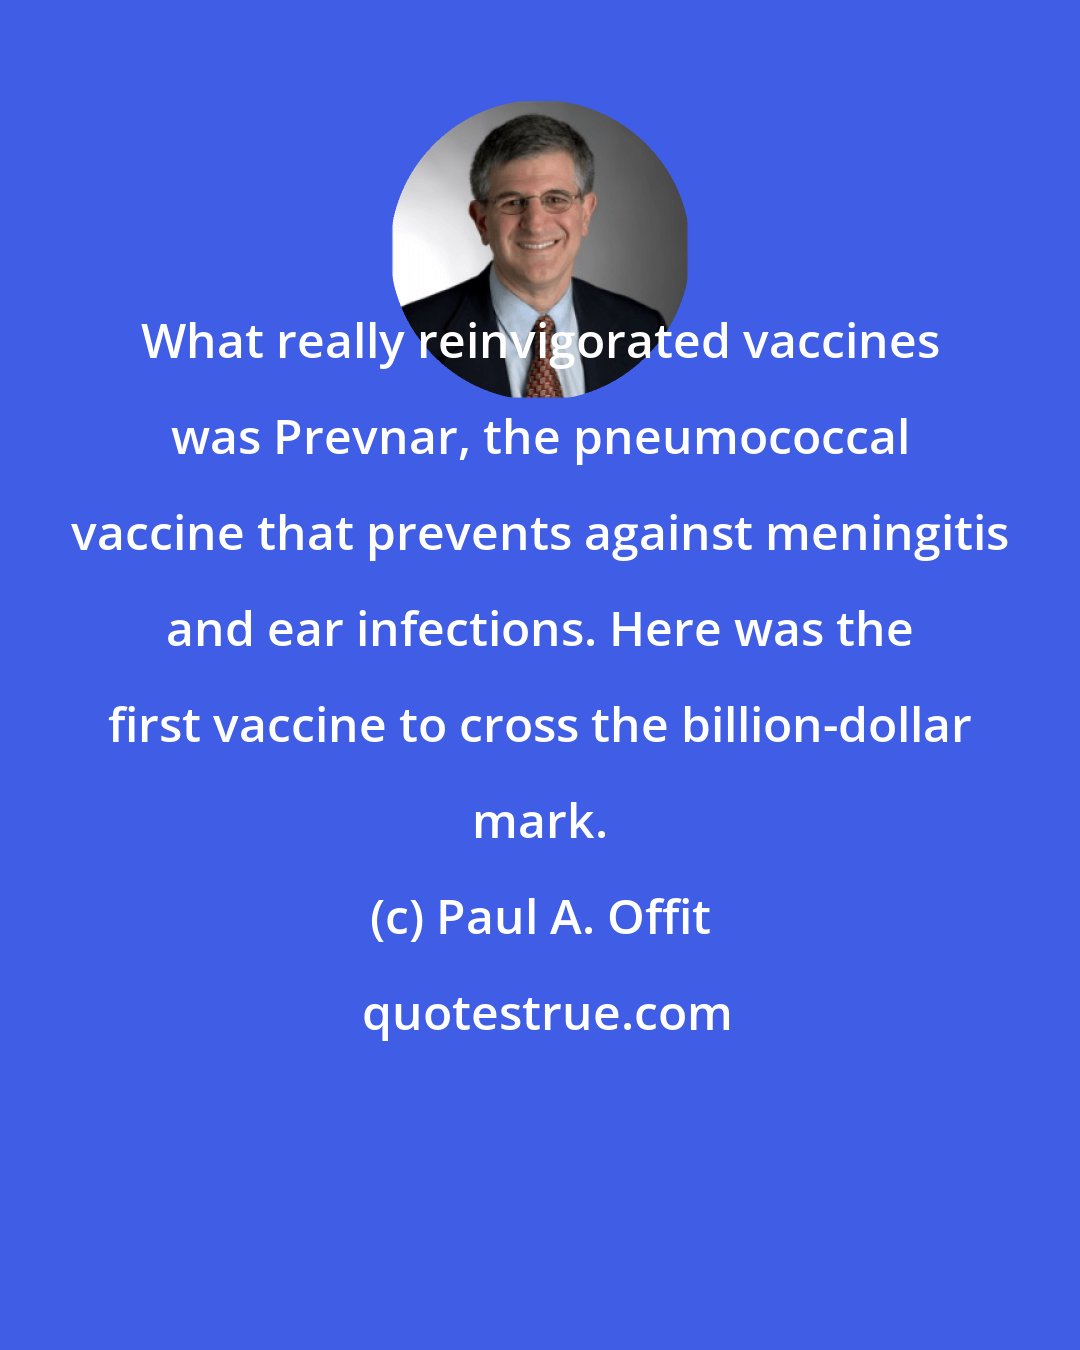 Paul A. Offit: What really reinvigorated vaccines was Prevnar, the pneumococcal vaccine that prevents against meningitis and ear infections. Here was the first vaccine to cross the billion-dollar mark.